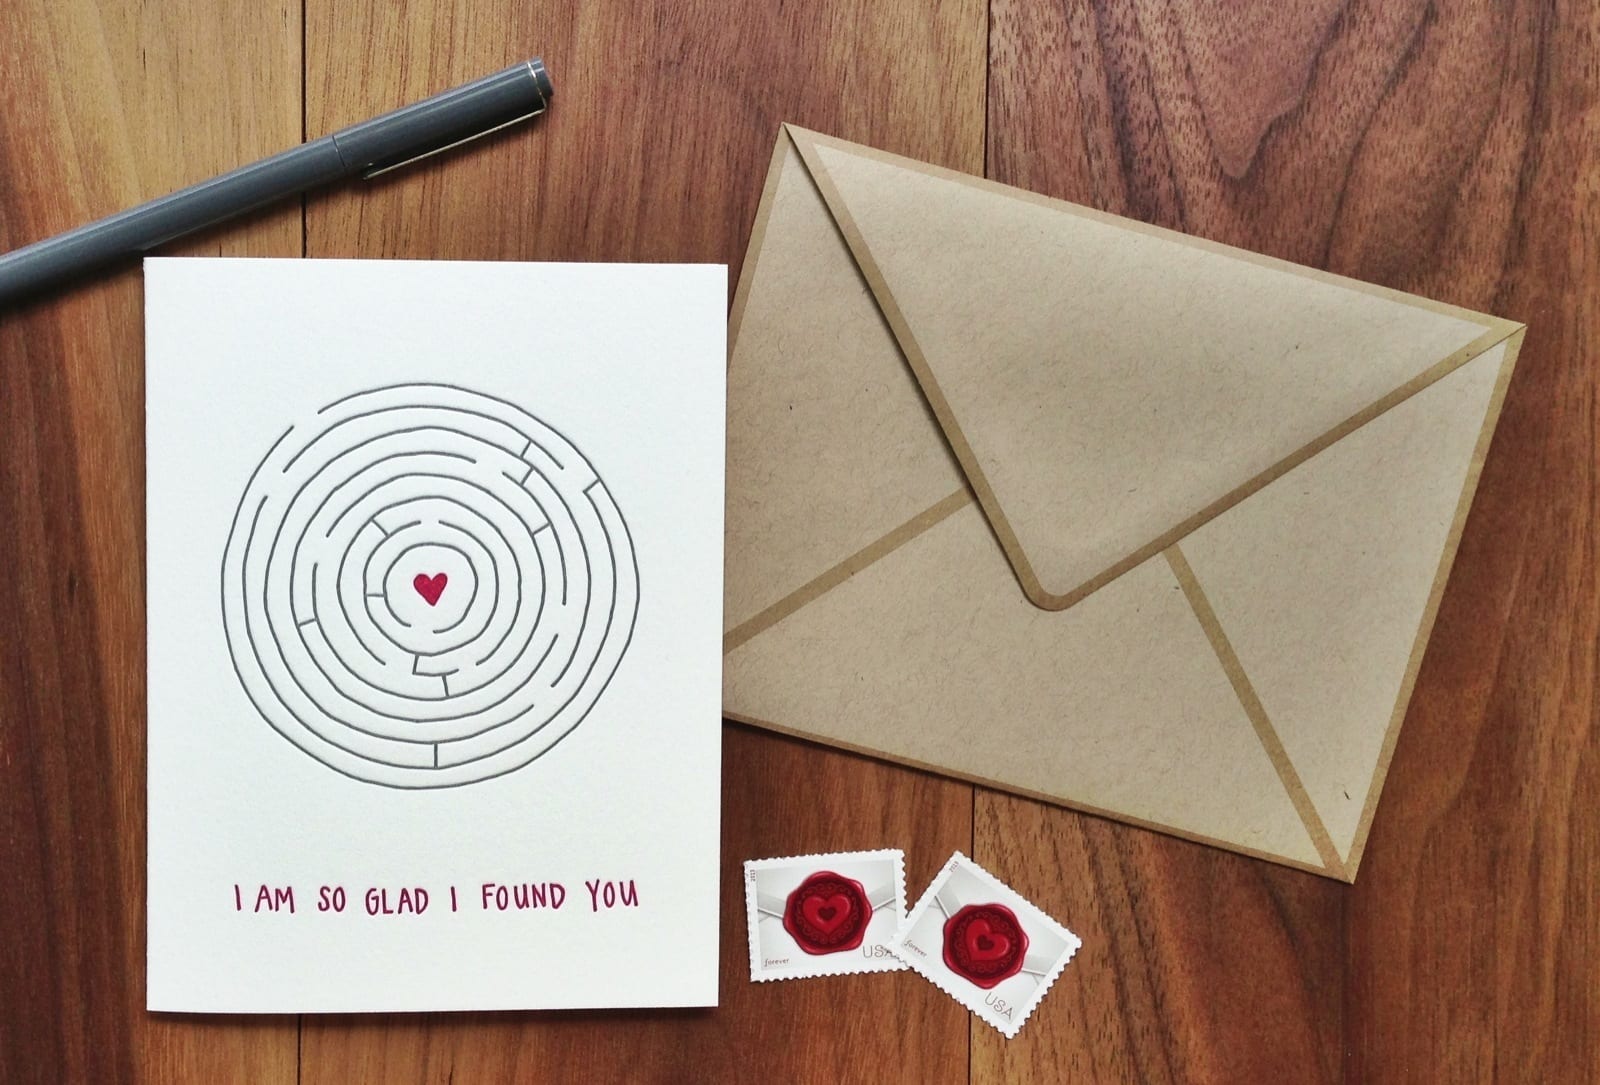 Letterpress printed greeting card with maze on front, paired with a kraft envelope